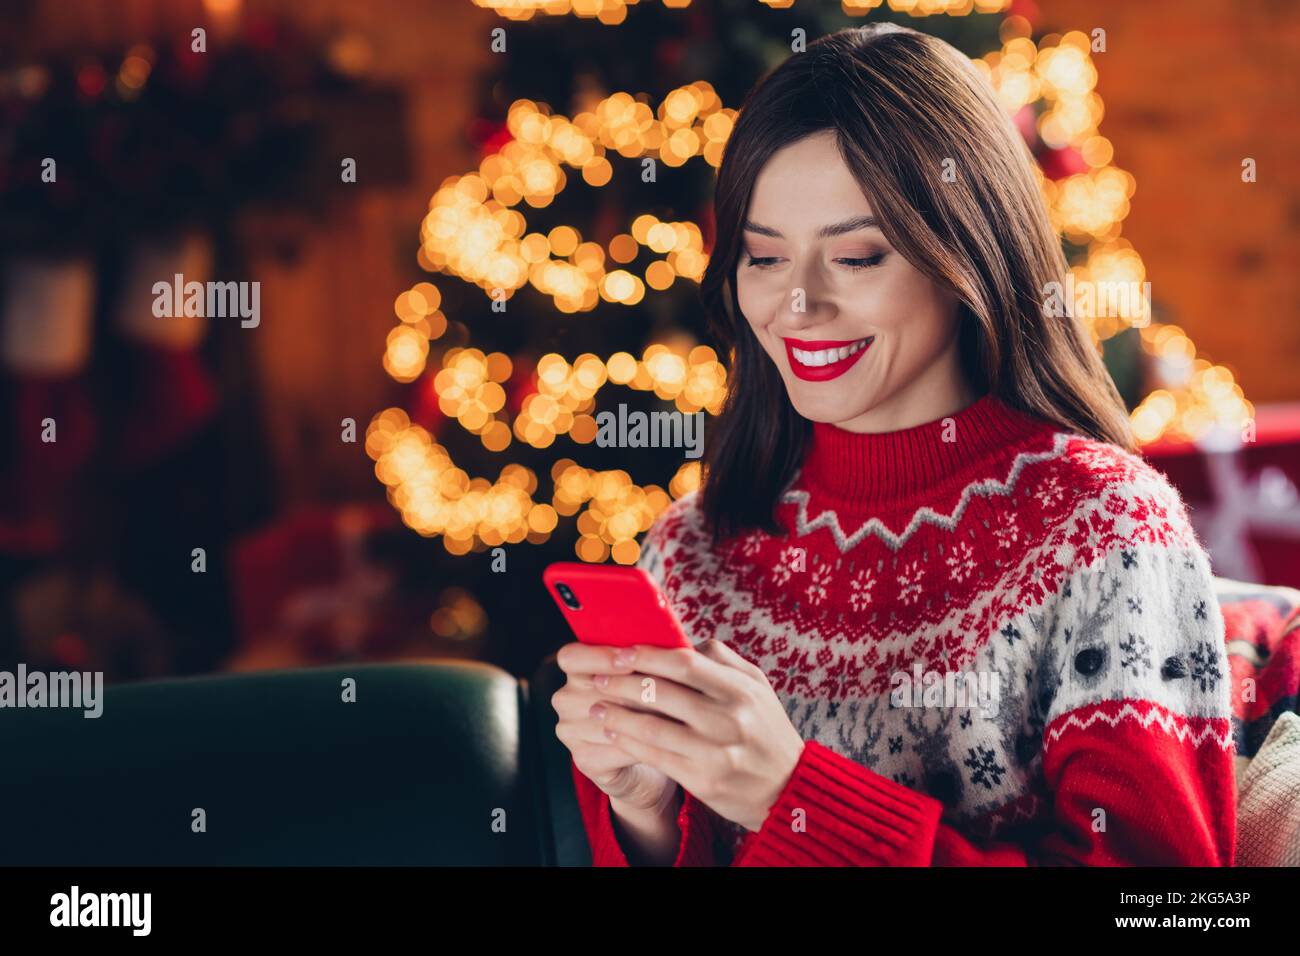 Portrait photo of young satisfied cute lady wear ugly red sweater hold her new apple iphone gift from parents chatting with friend near xmas tree Stock Photo